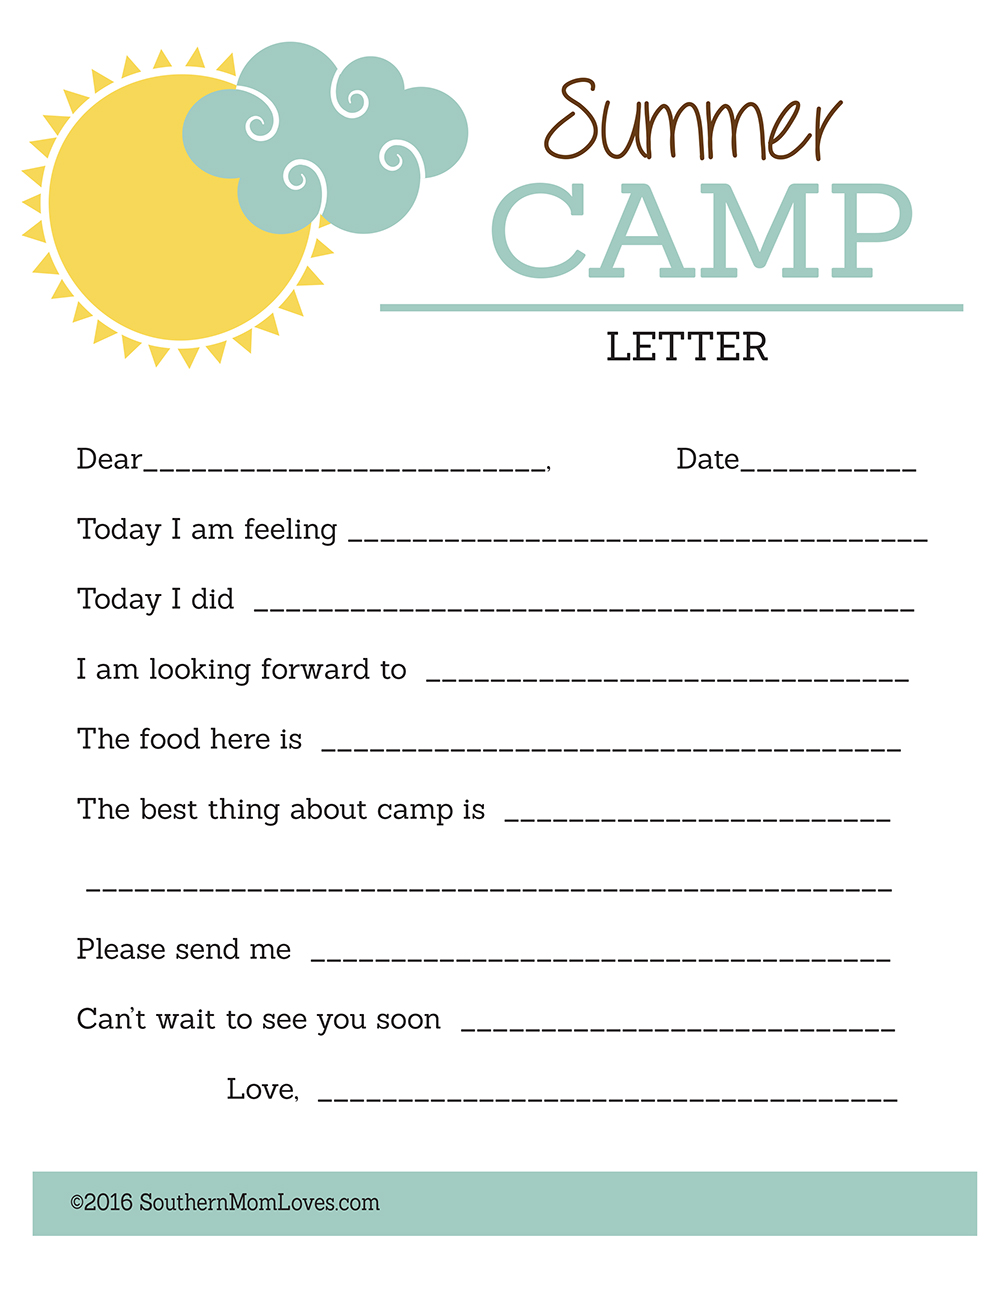 southern-mom-loves-free-summer-camp-printables-for-kids